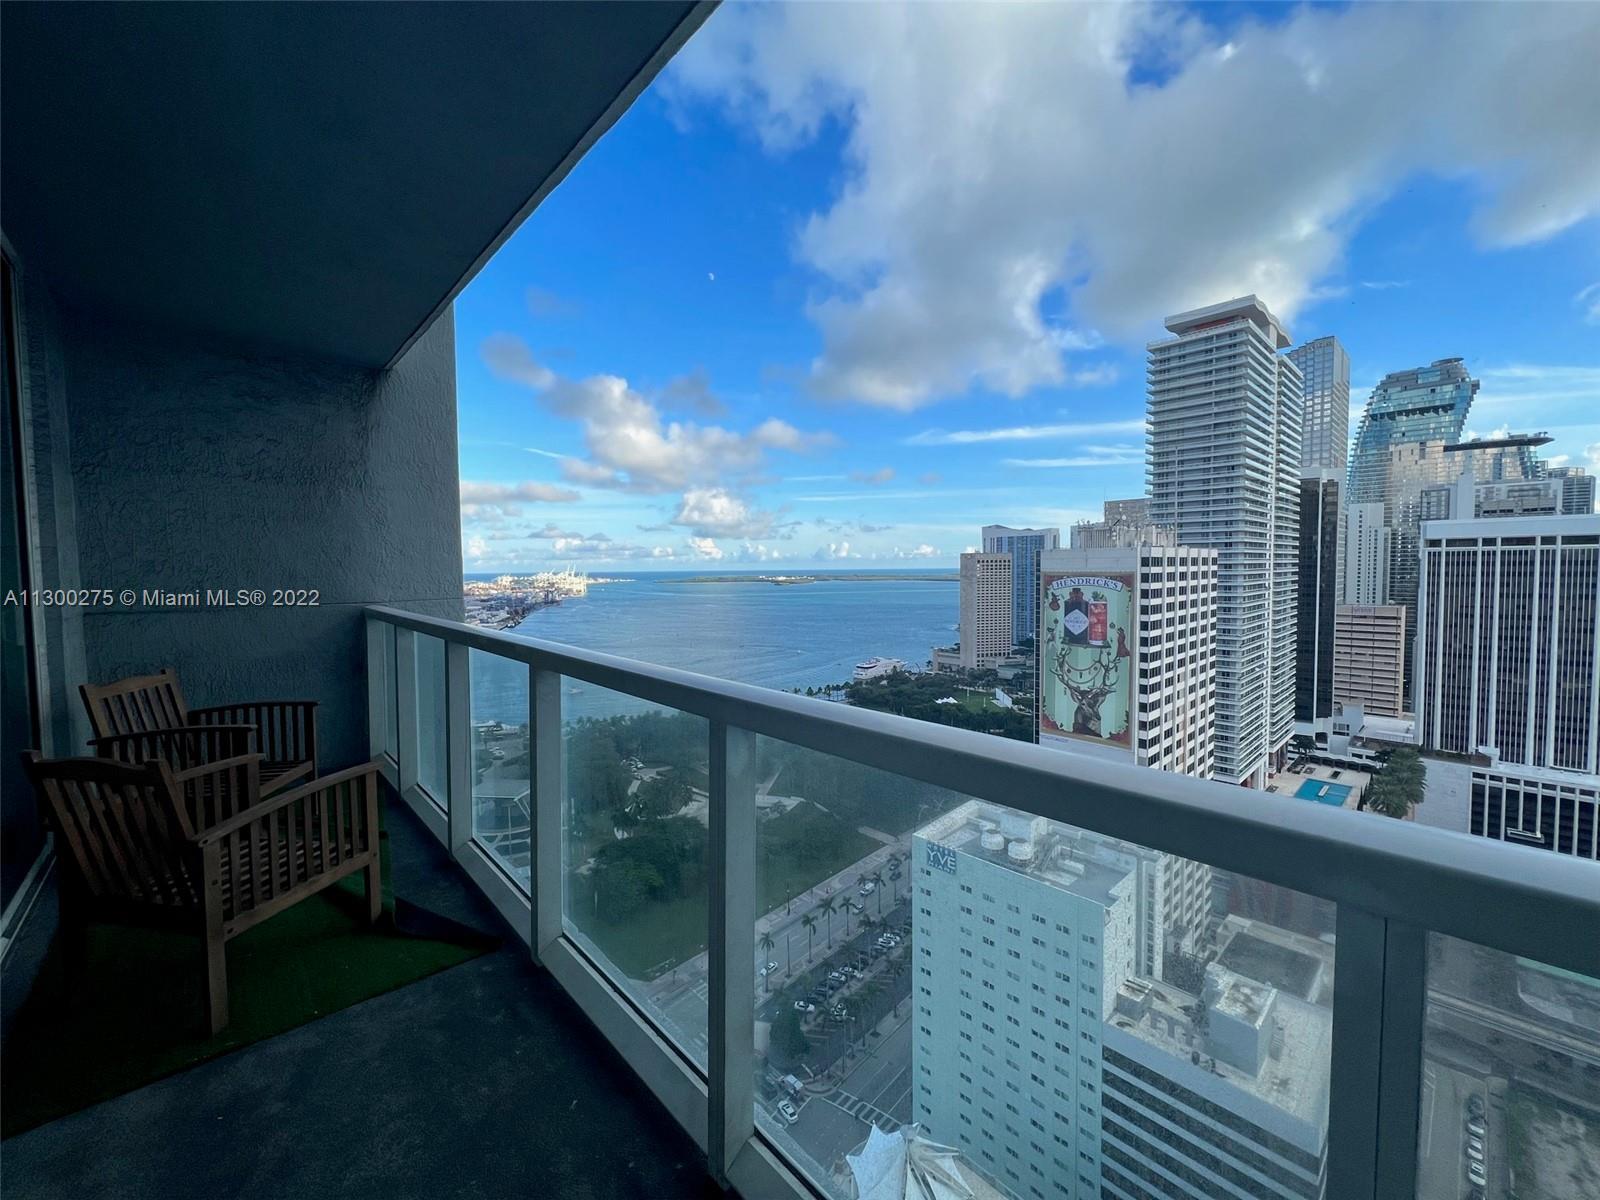 SPACIOUS STUDIO AT VIZCAYNE WITH STUNNING VIEWS OF BAYFRONT PARK AND BISCAYNE BAY. RENTED TO A GREAT